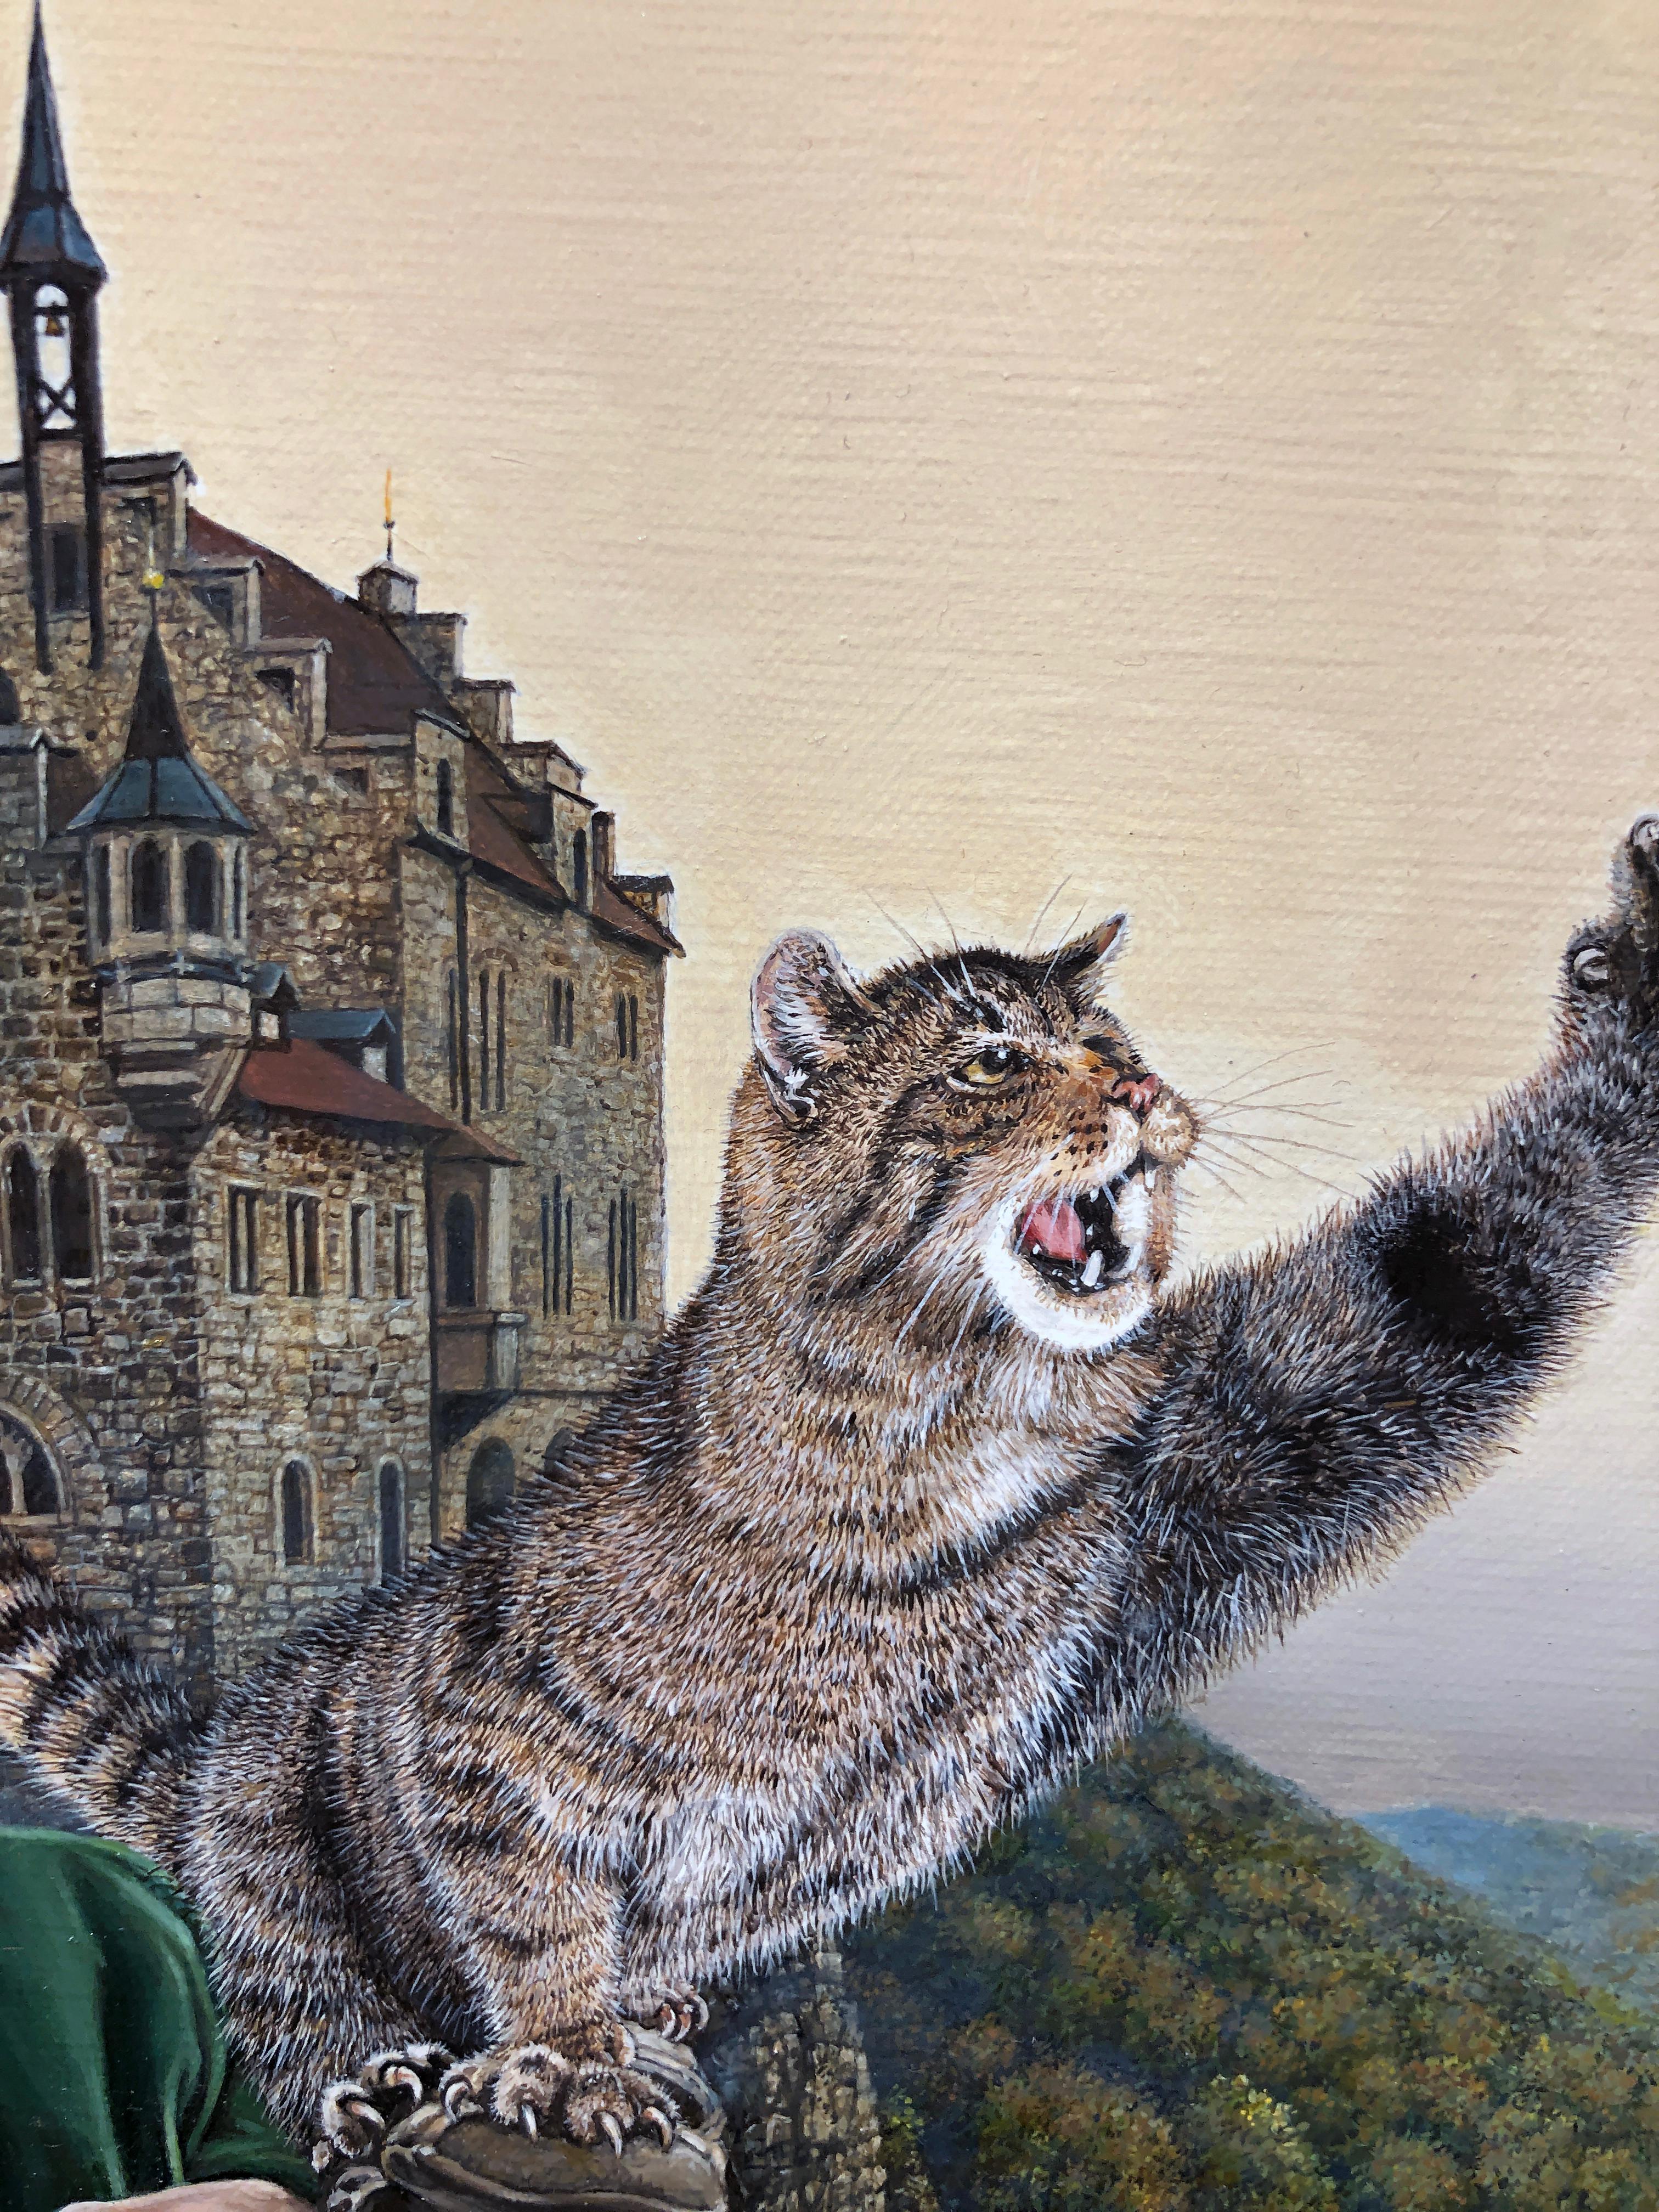 Cat as Catch Can -Surreal Painting, Cat, Medieval Falconry, Bat-Eared Elephant 1